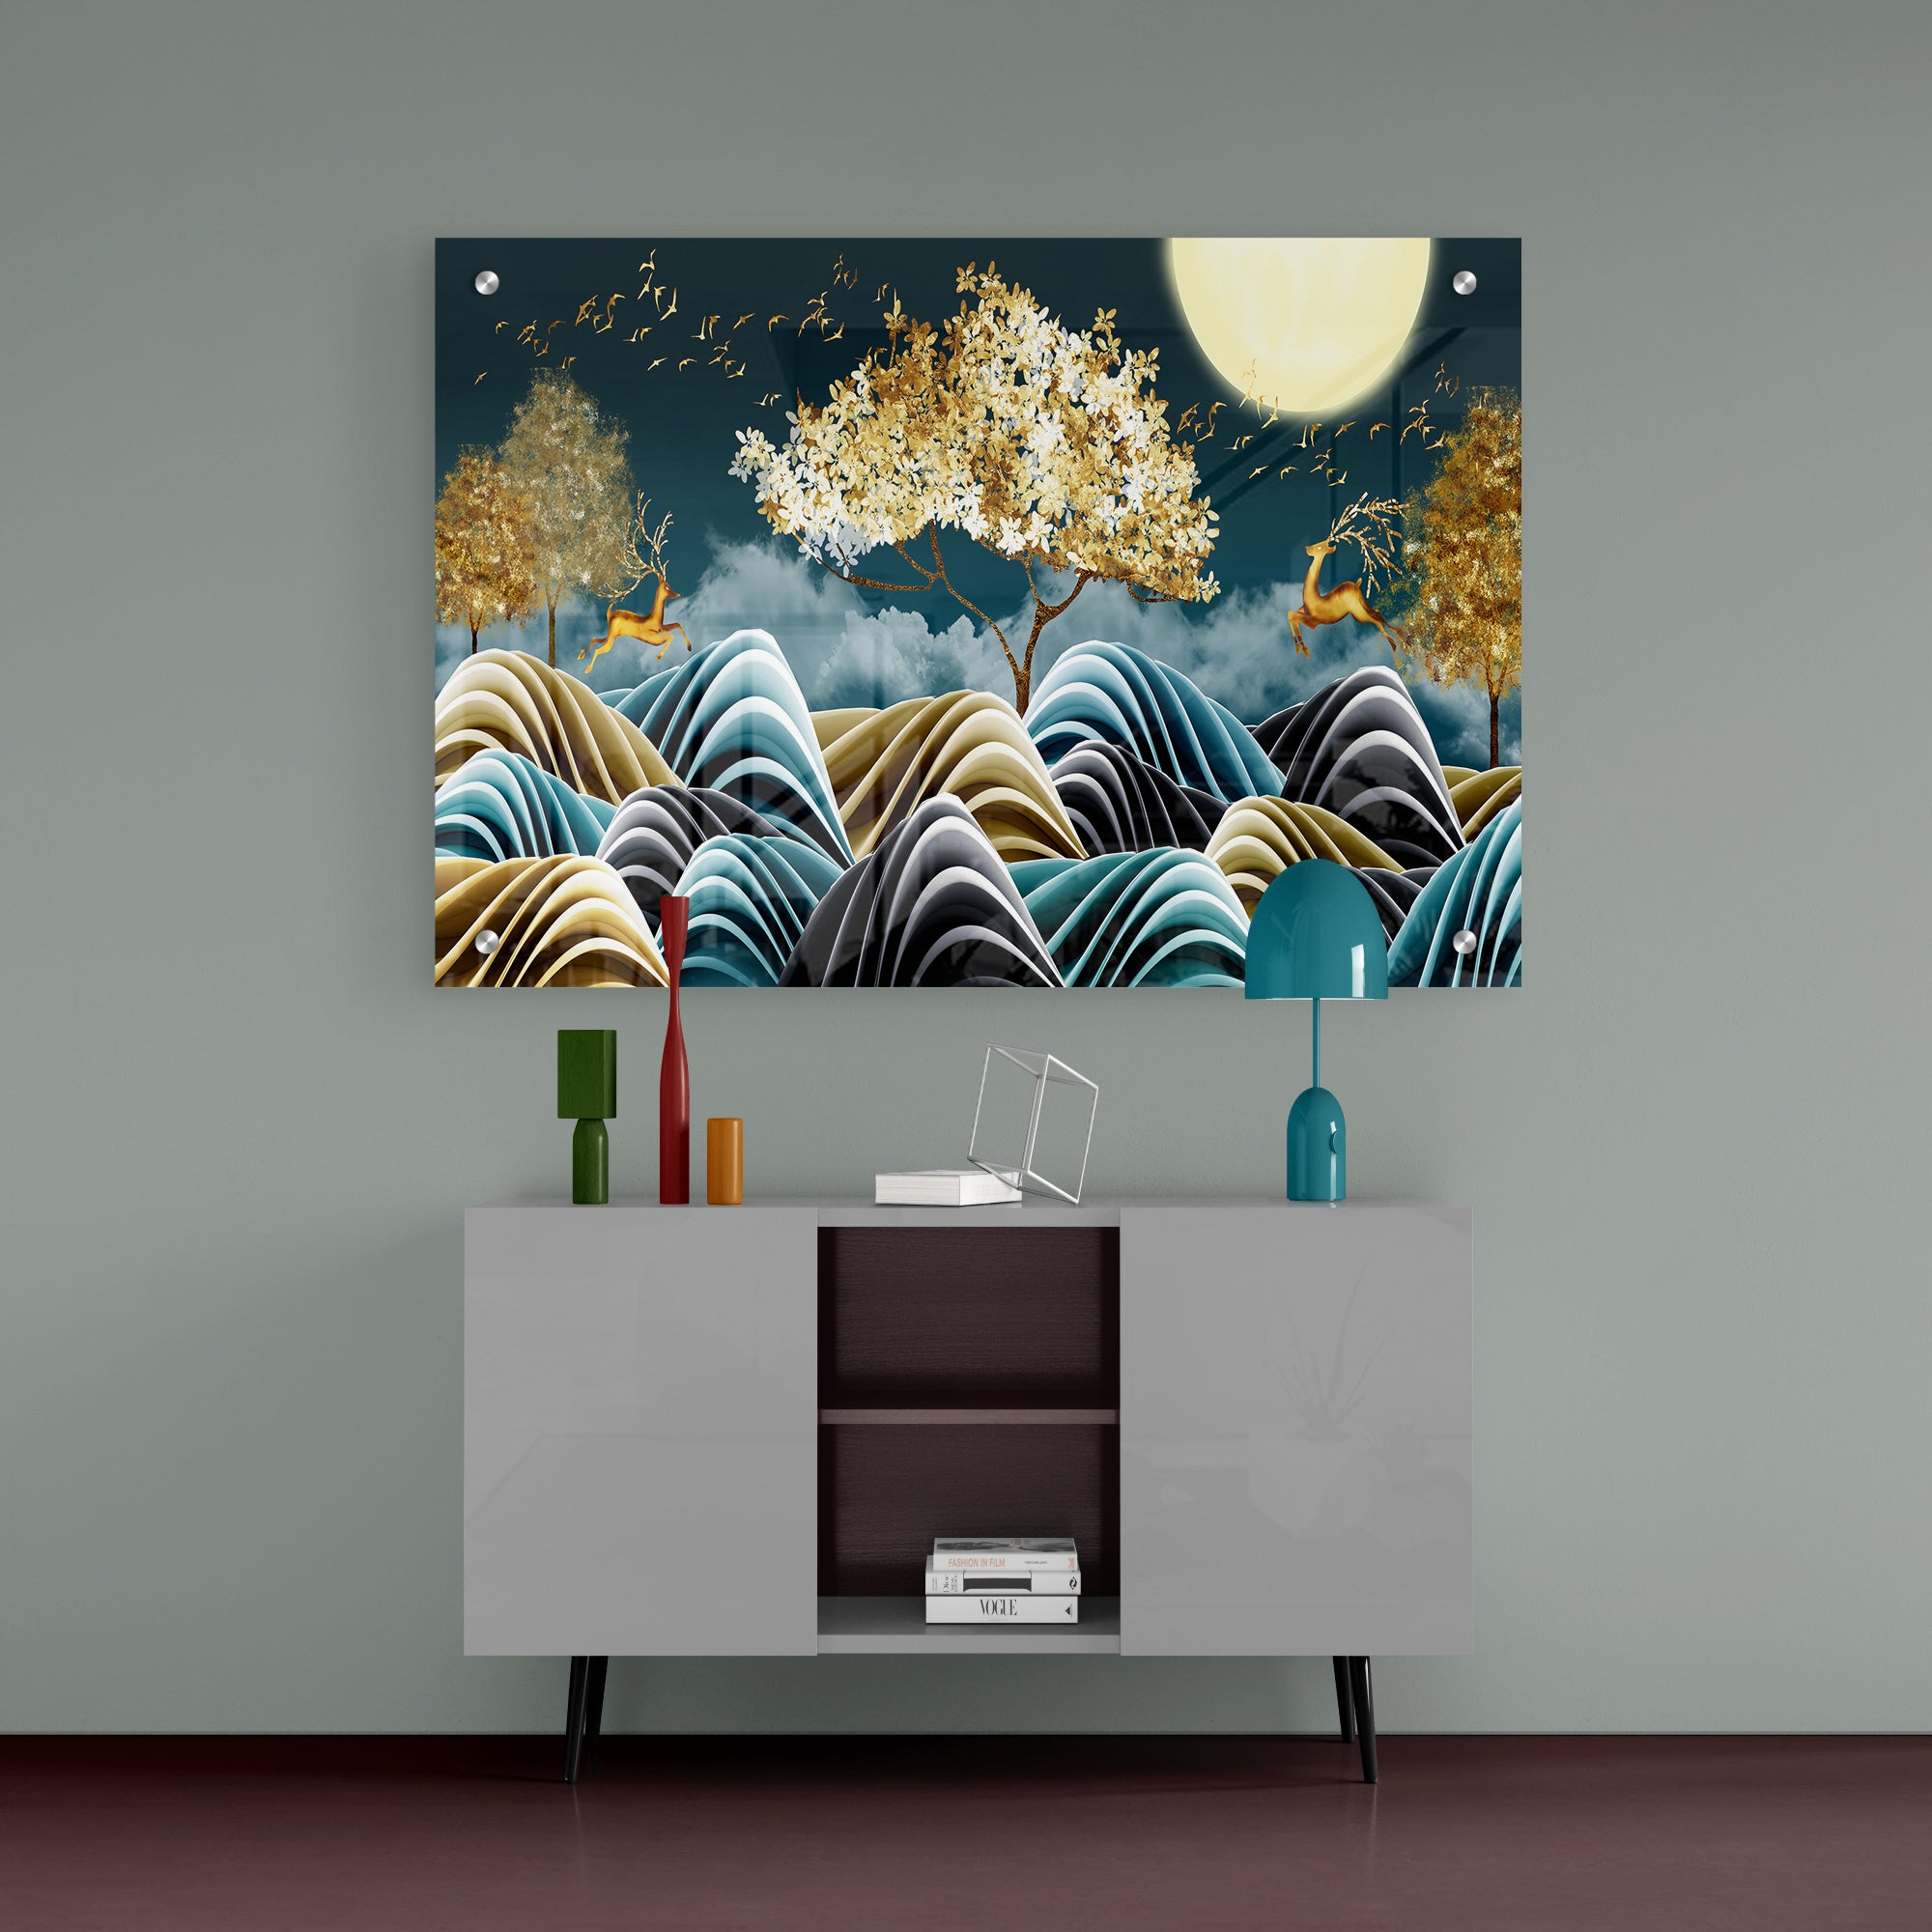 Moon With Golden Tree Abstract Acrylic Wall Painting